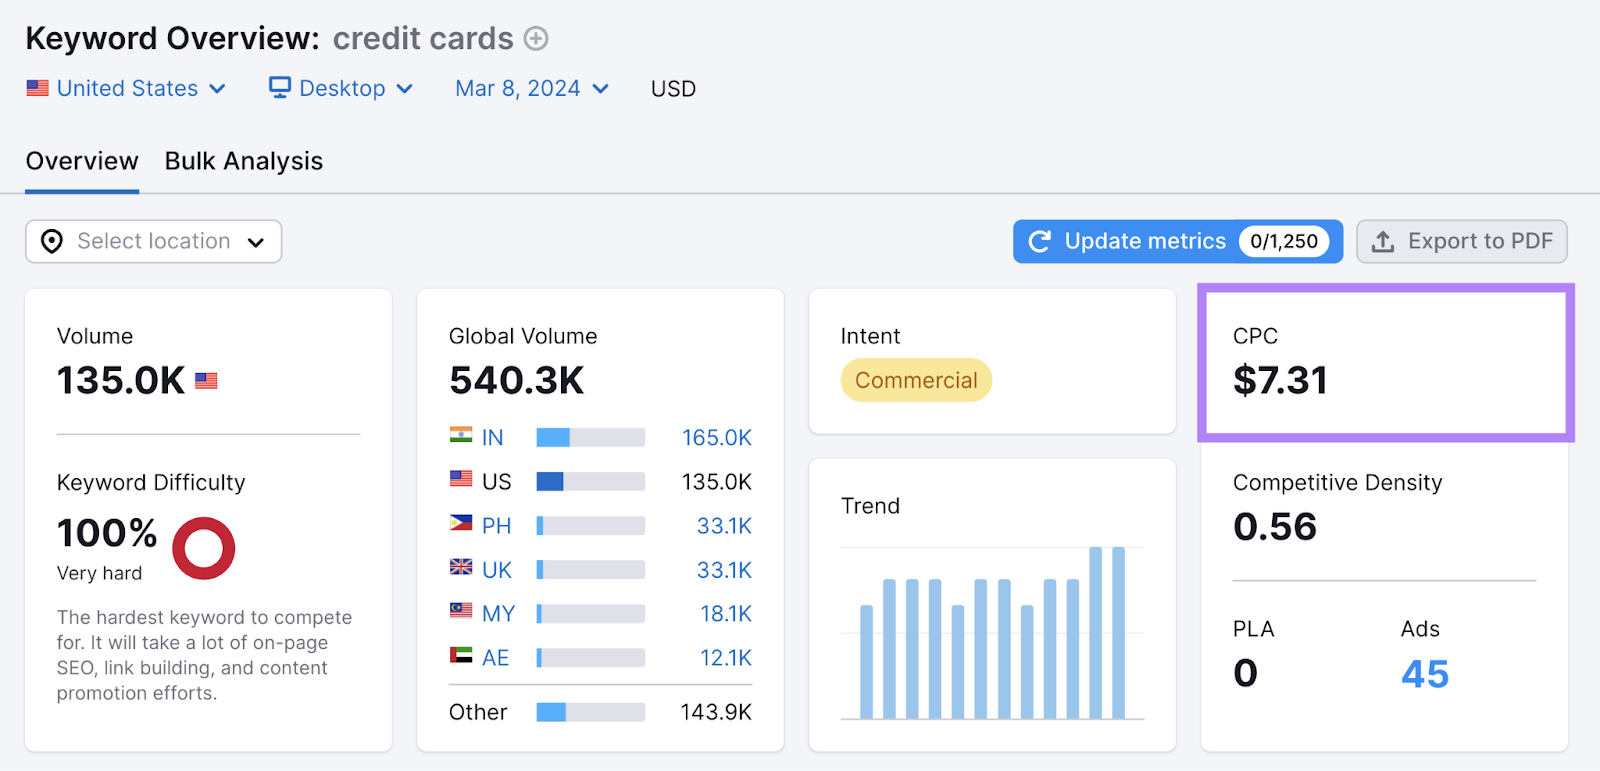 Cost per click metric for "credit cards" shown successful  Keyword Overview